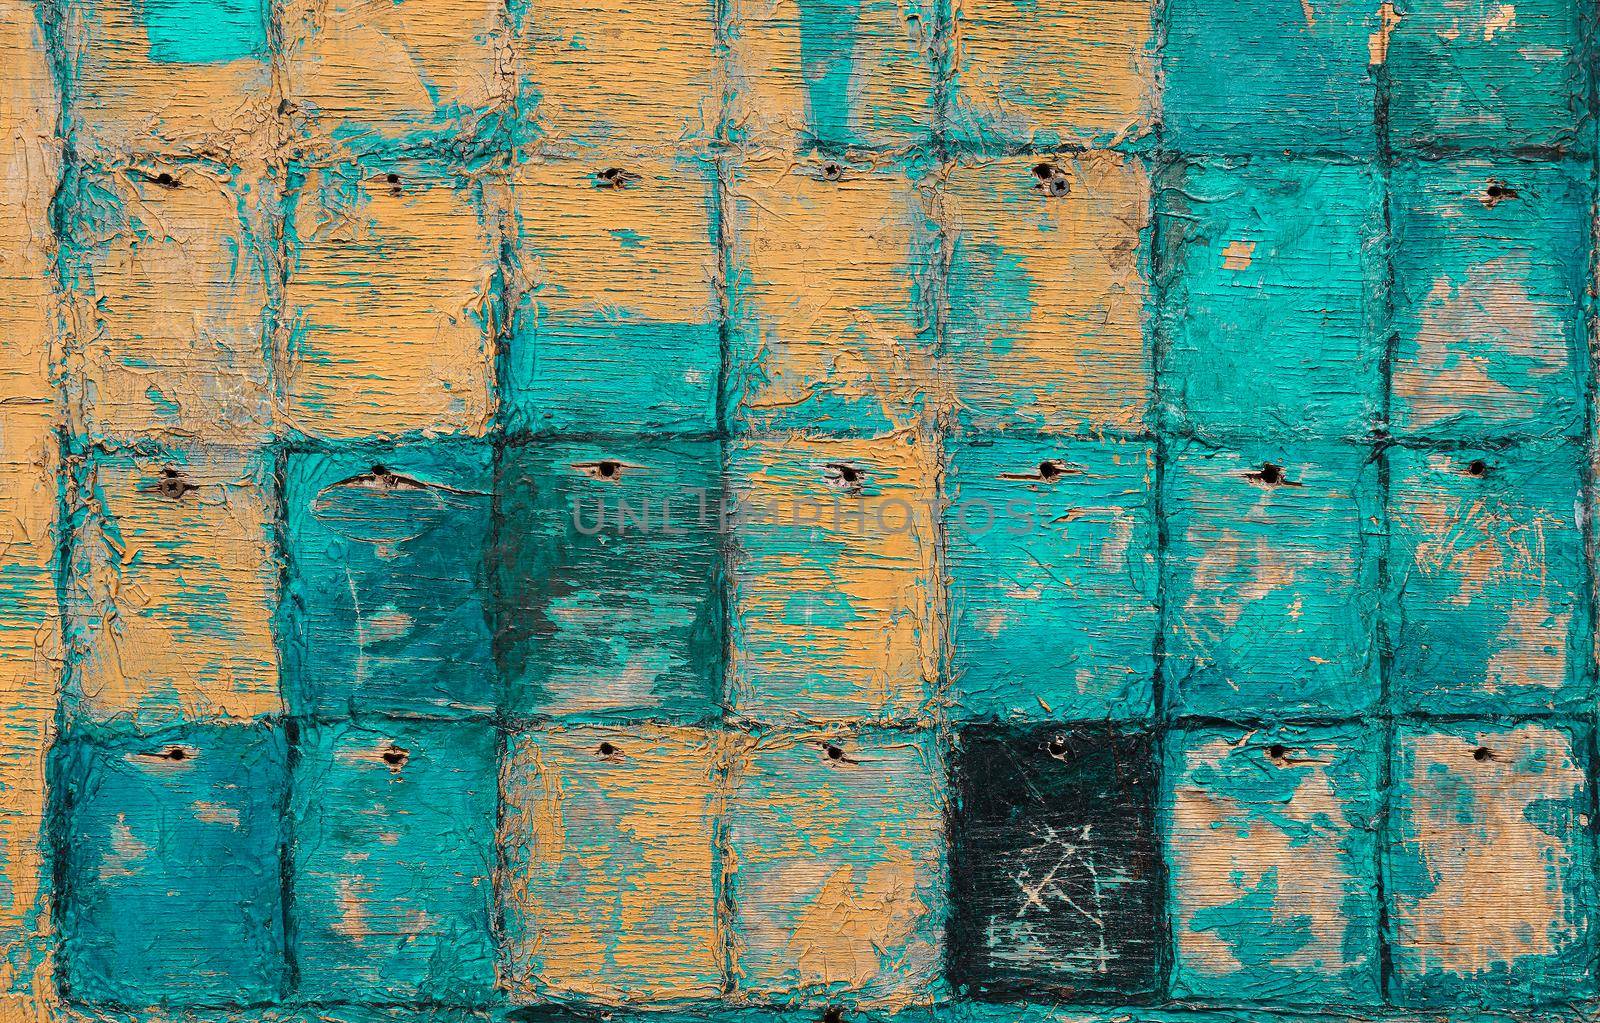 Close up abstract uneven grunge orange yellow and teal blue background with paint peeling off old weathered checkered wooden plywood surface